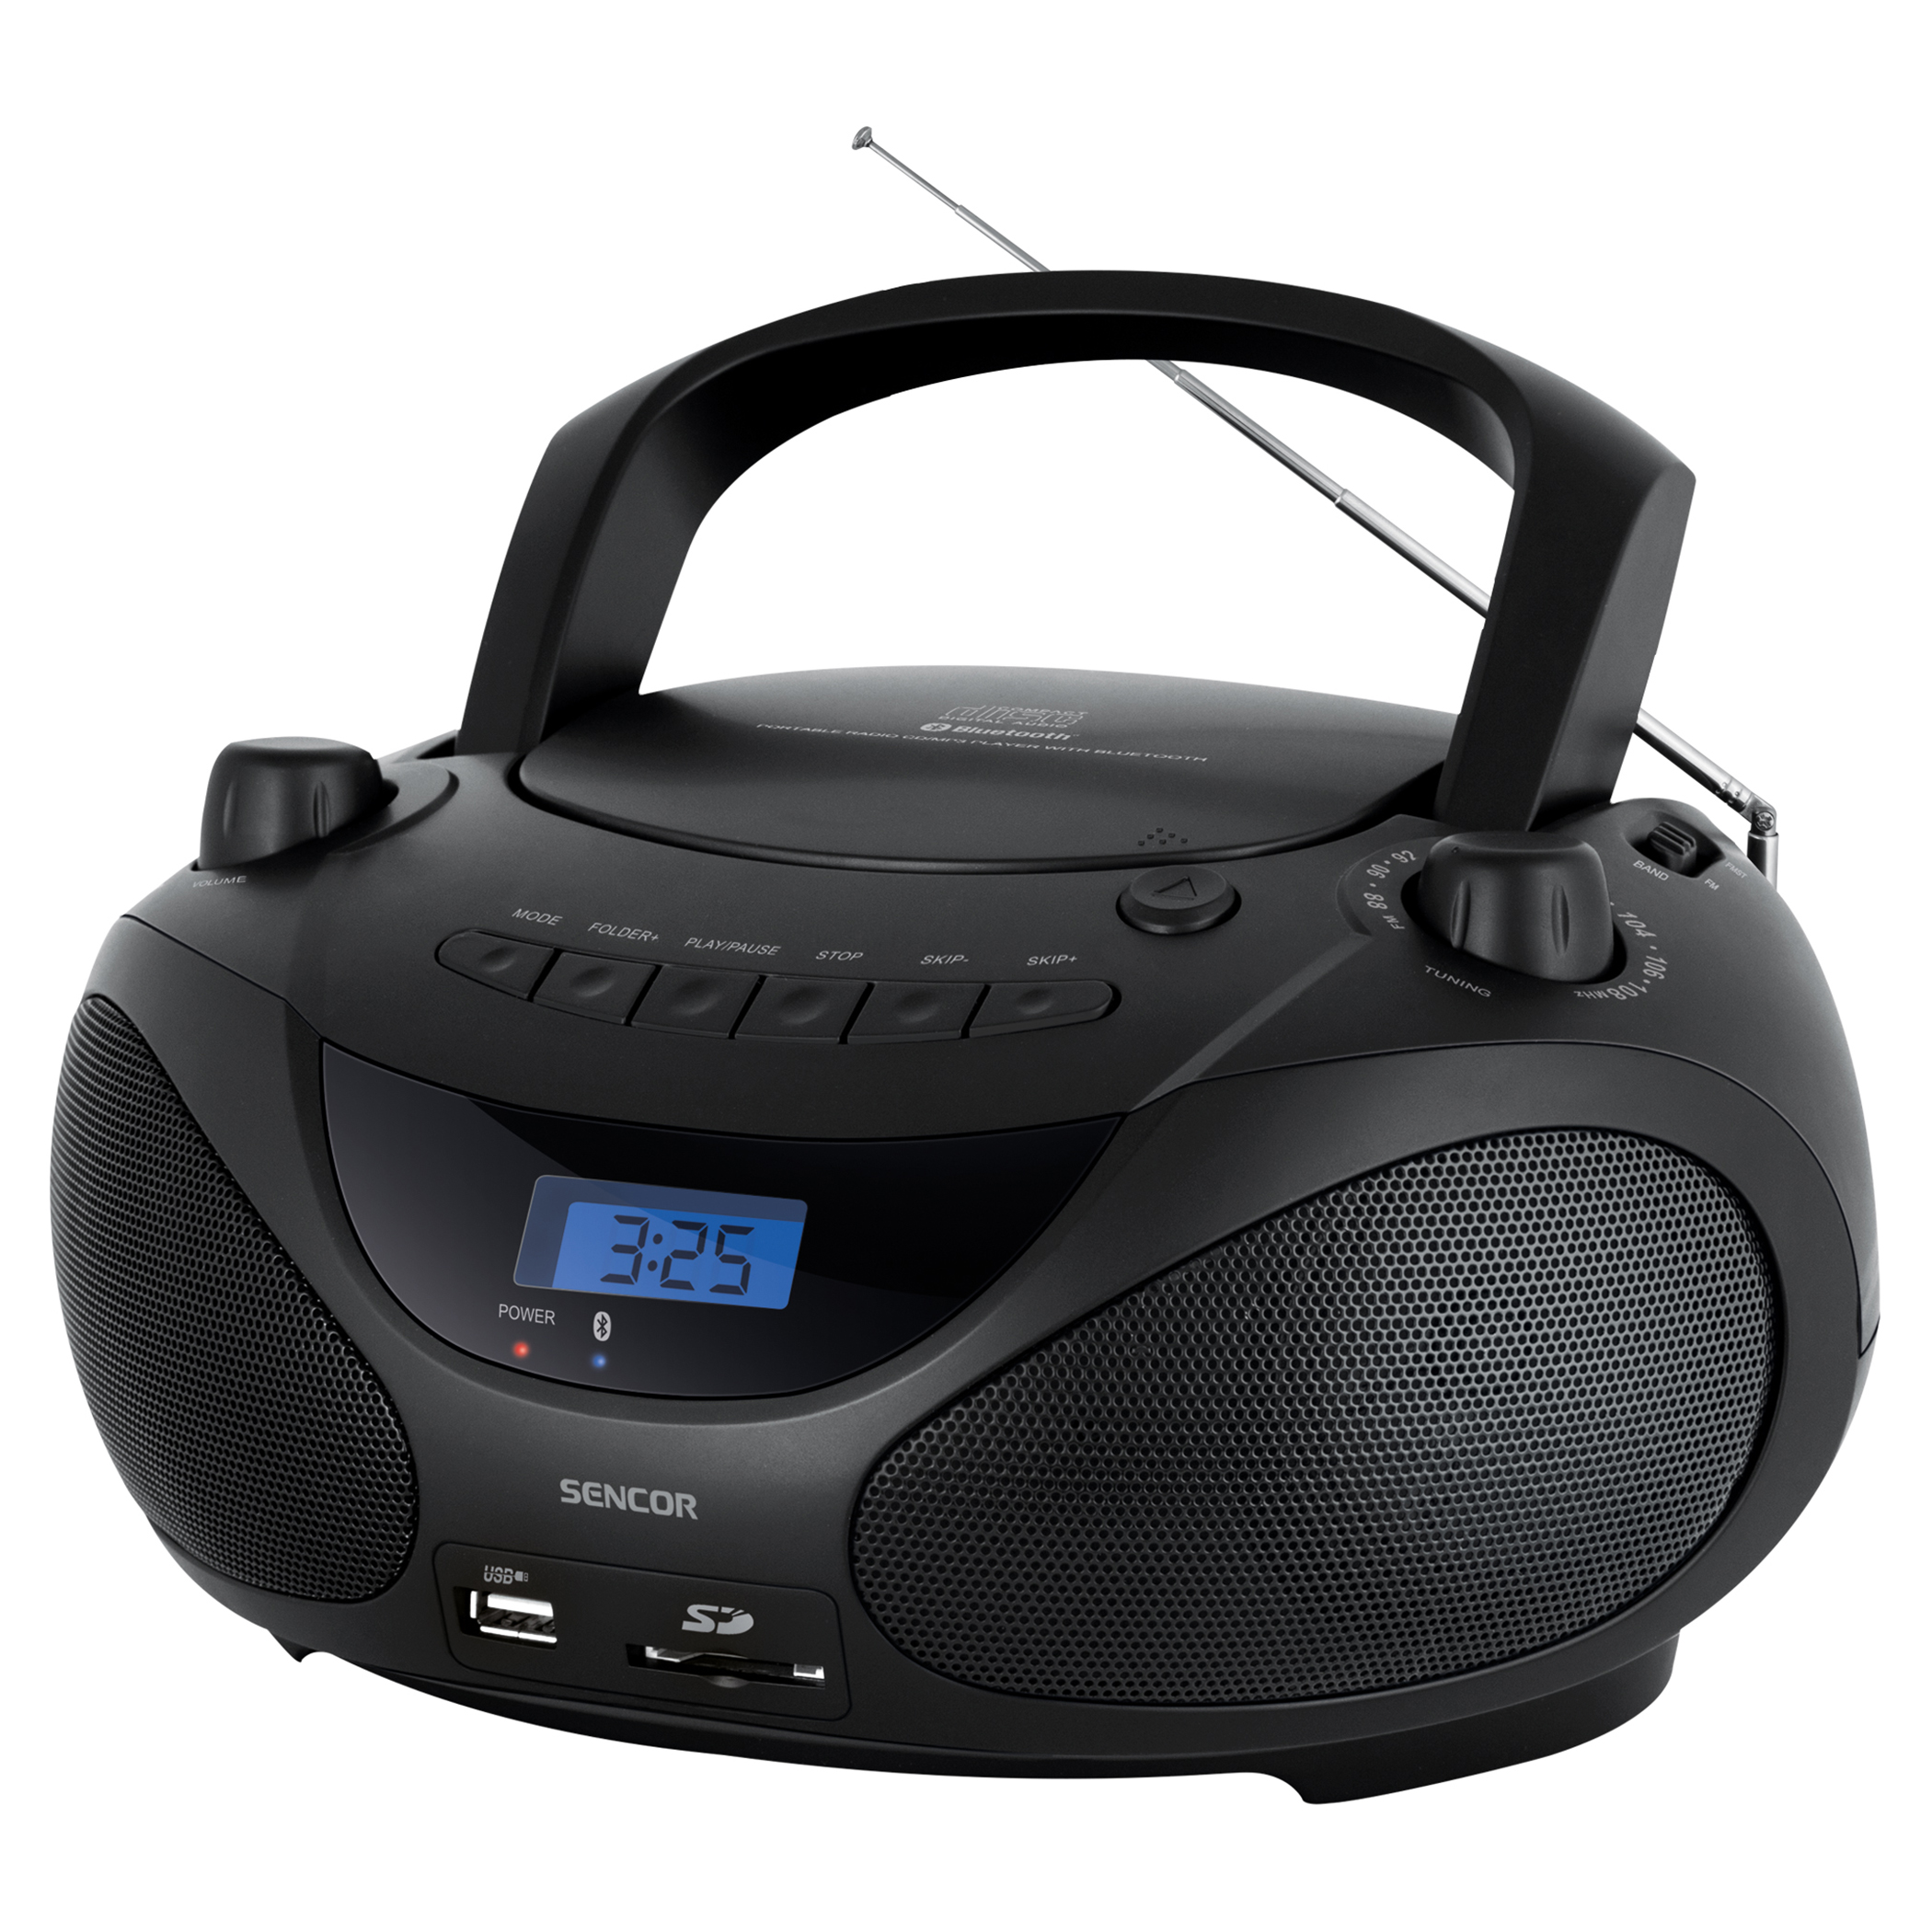 Gedateerd Portaal Voorzien Portable CD Player with BT, MP3, USB, SD, AUX and FM Radio | SPT 3228 B |  Sencor